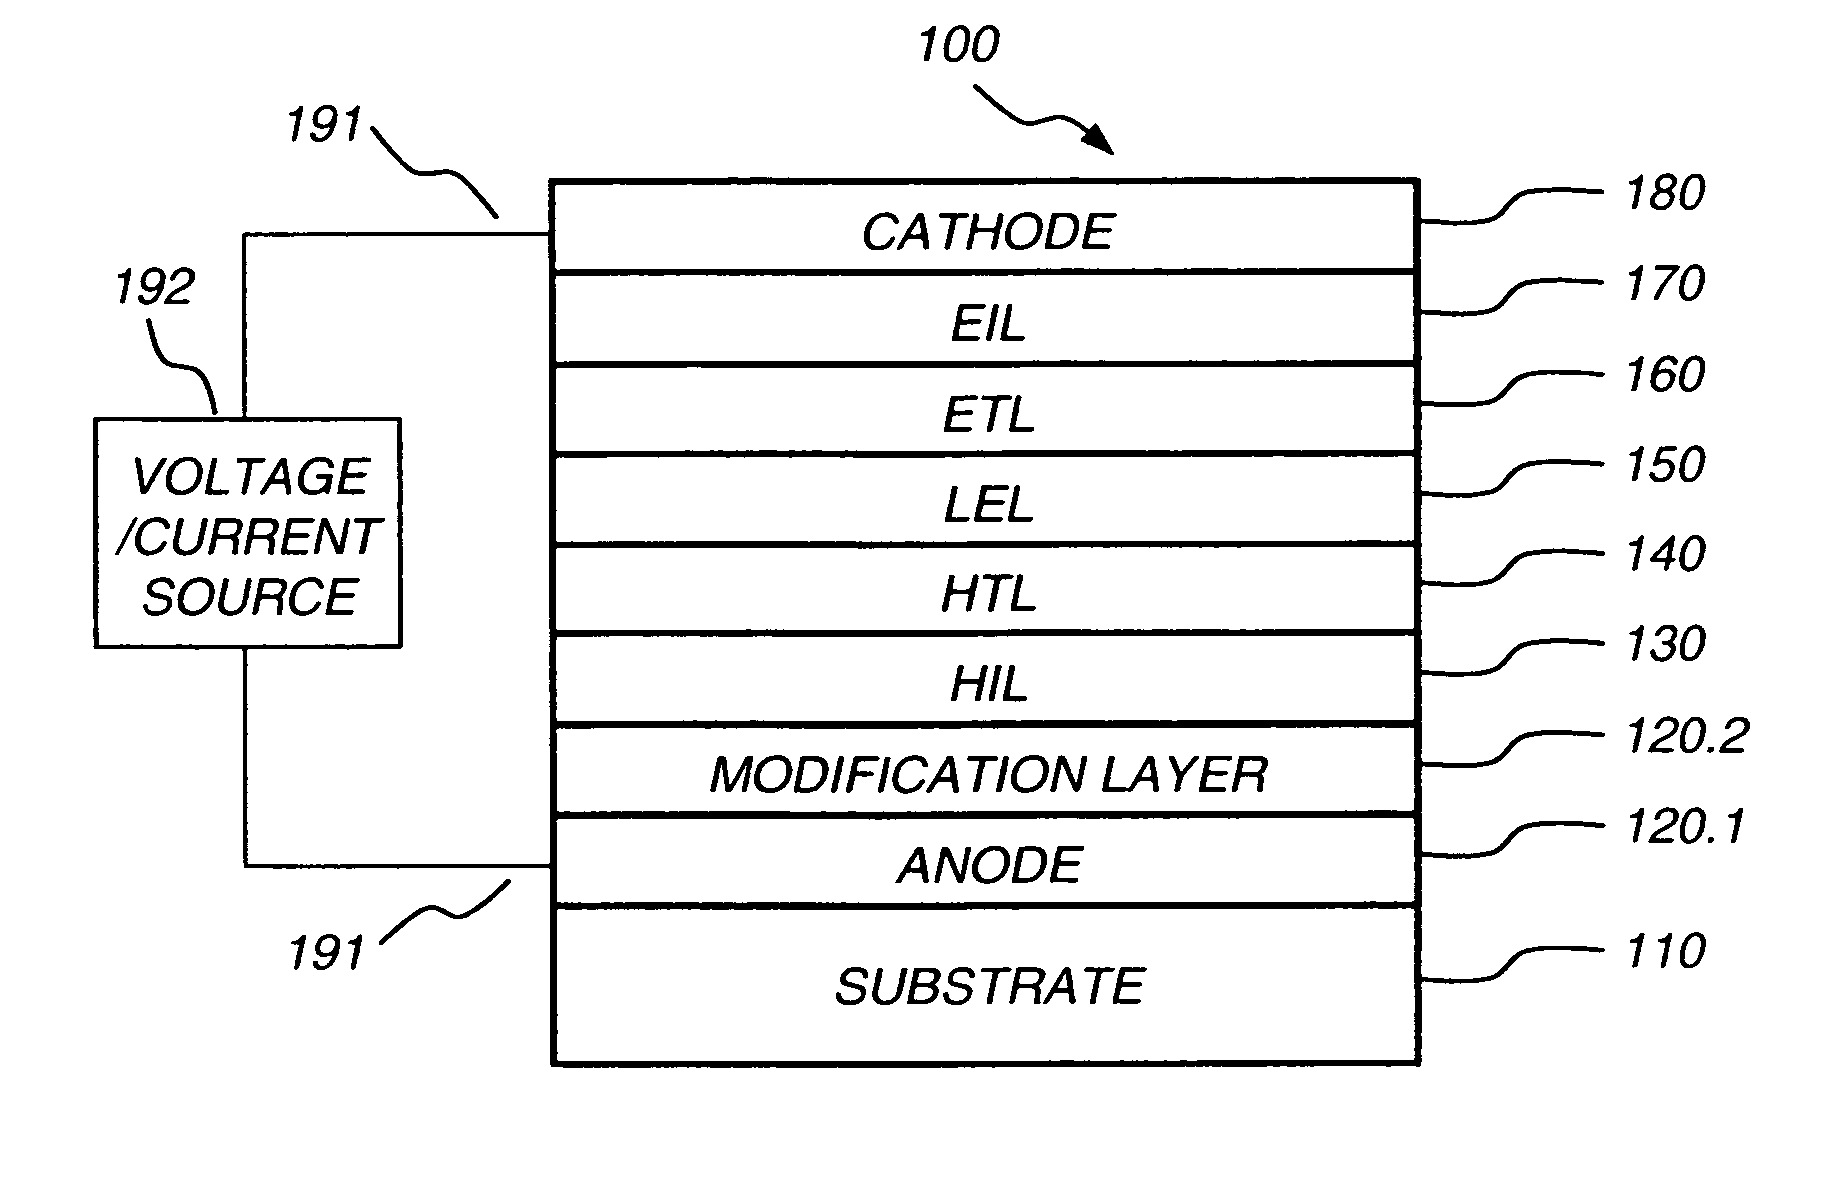 Fluorocarbon electrode modification layer